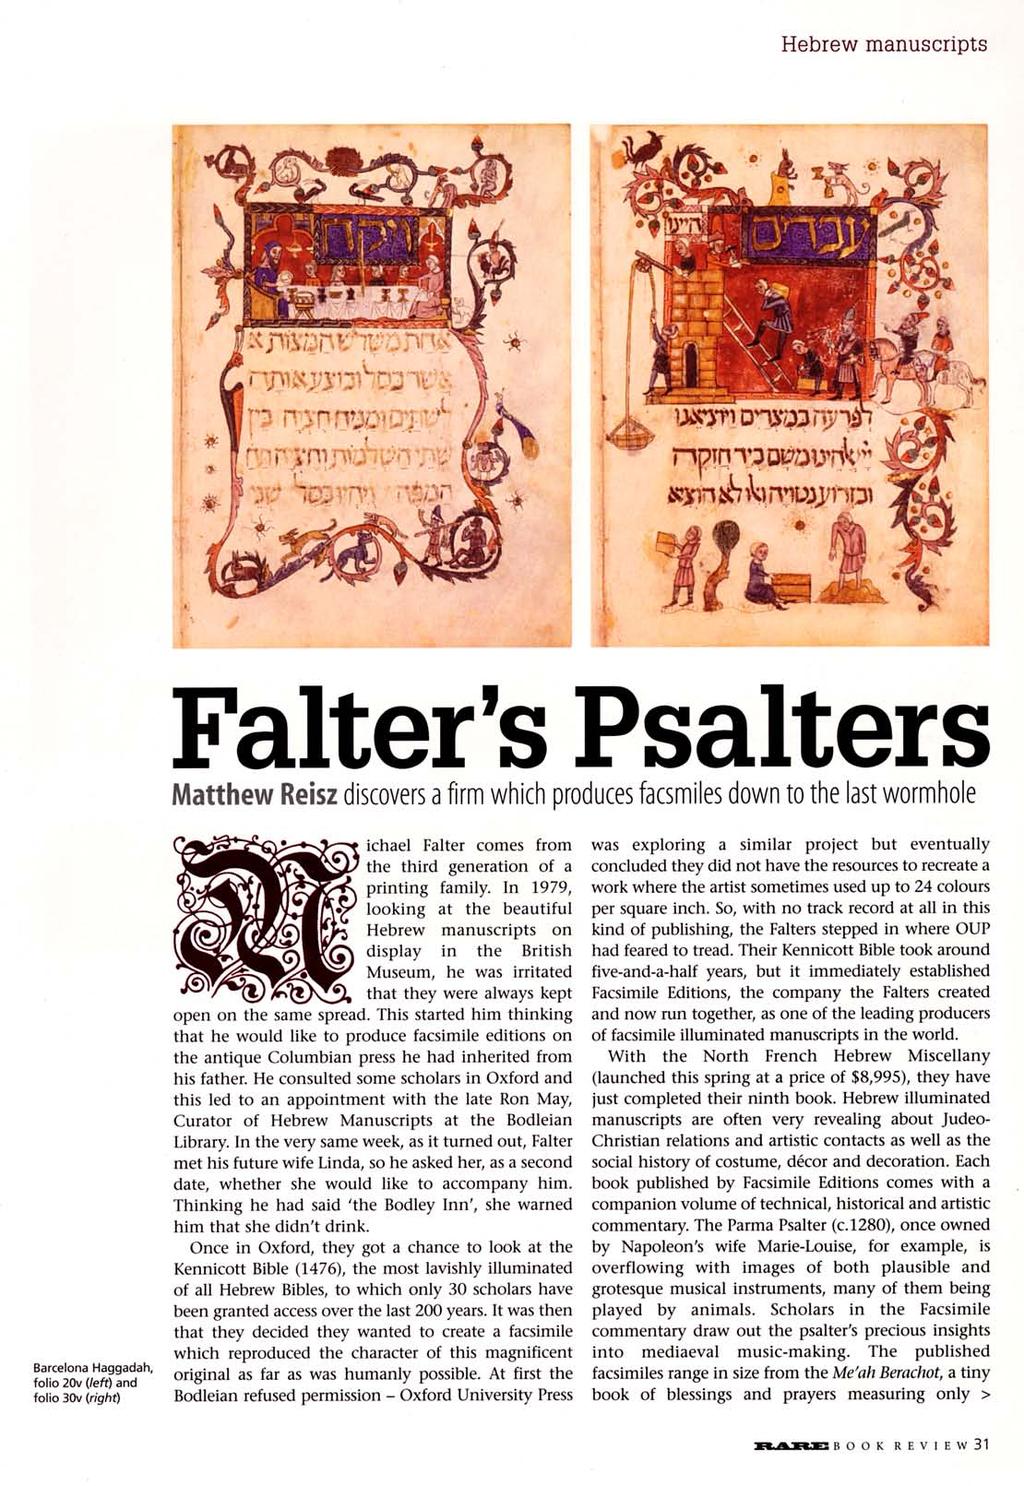 Falter's Psalters Matthew Reisz discovers a firm which produces facsimiles down to the last wormhole ichael Falter comes from the third generation of a printing family.